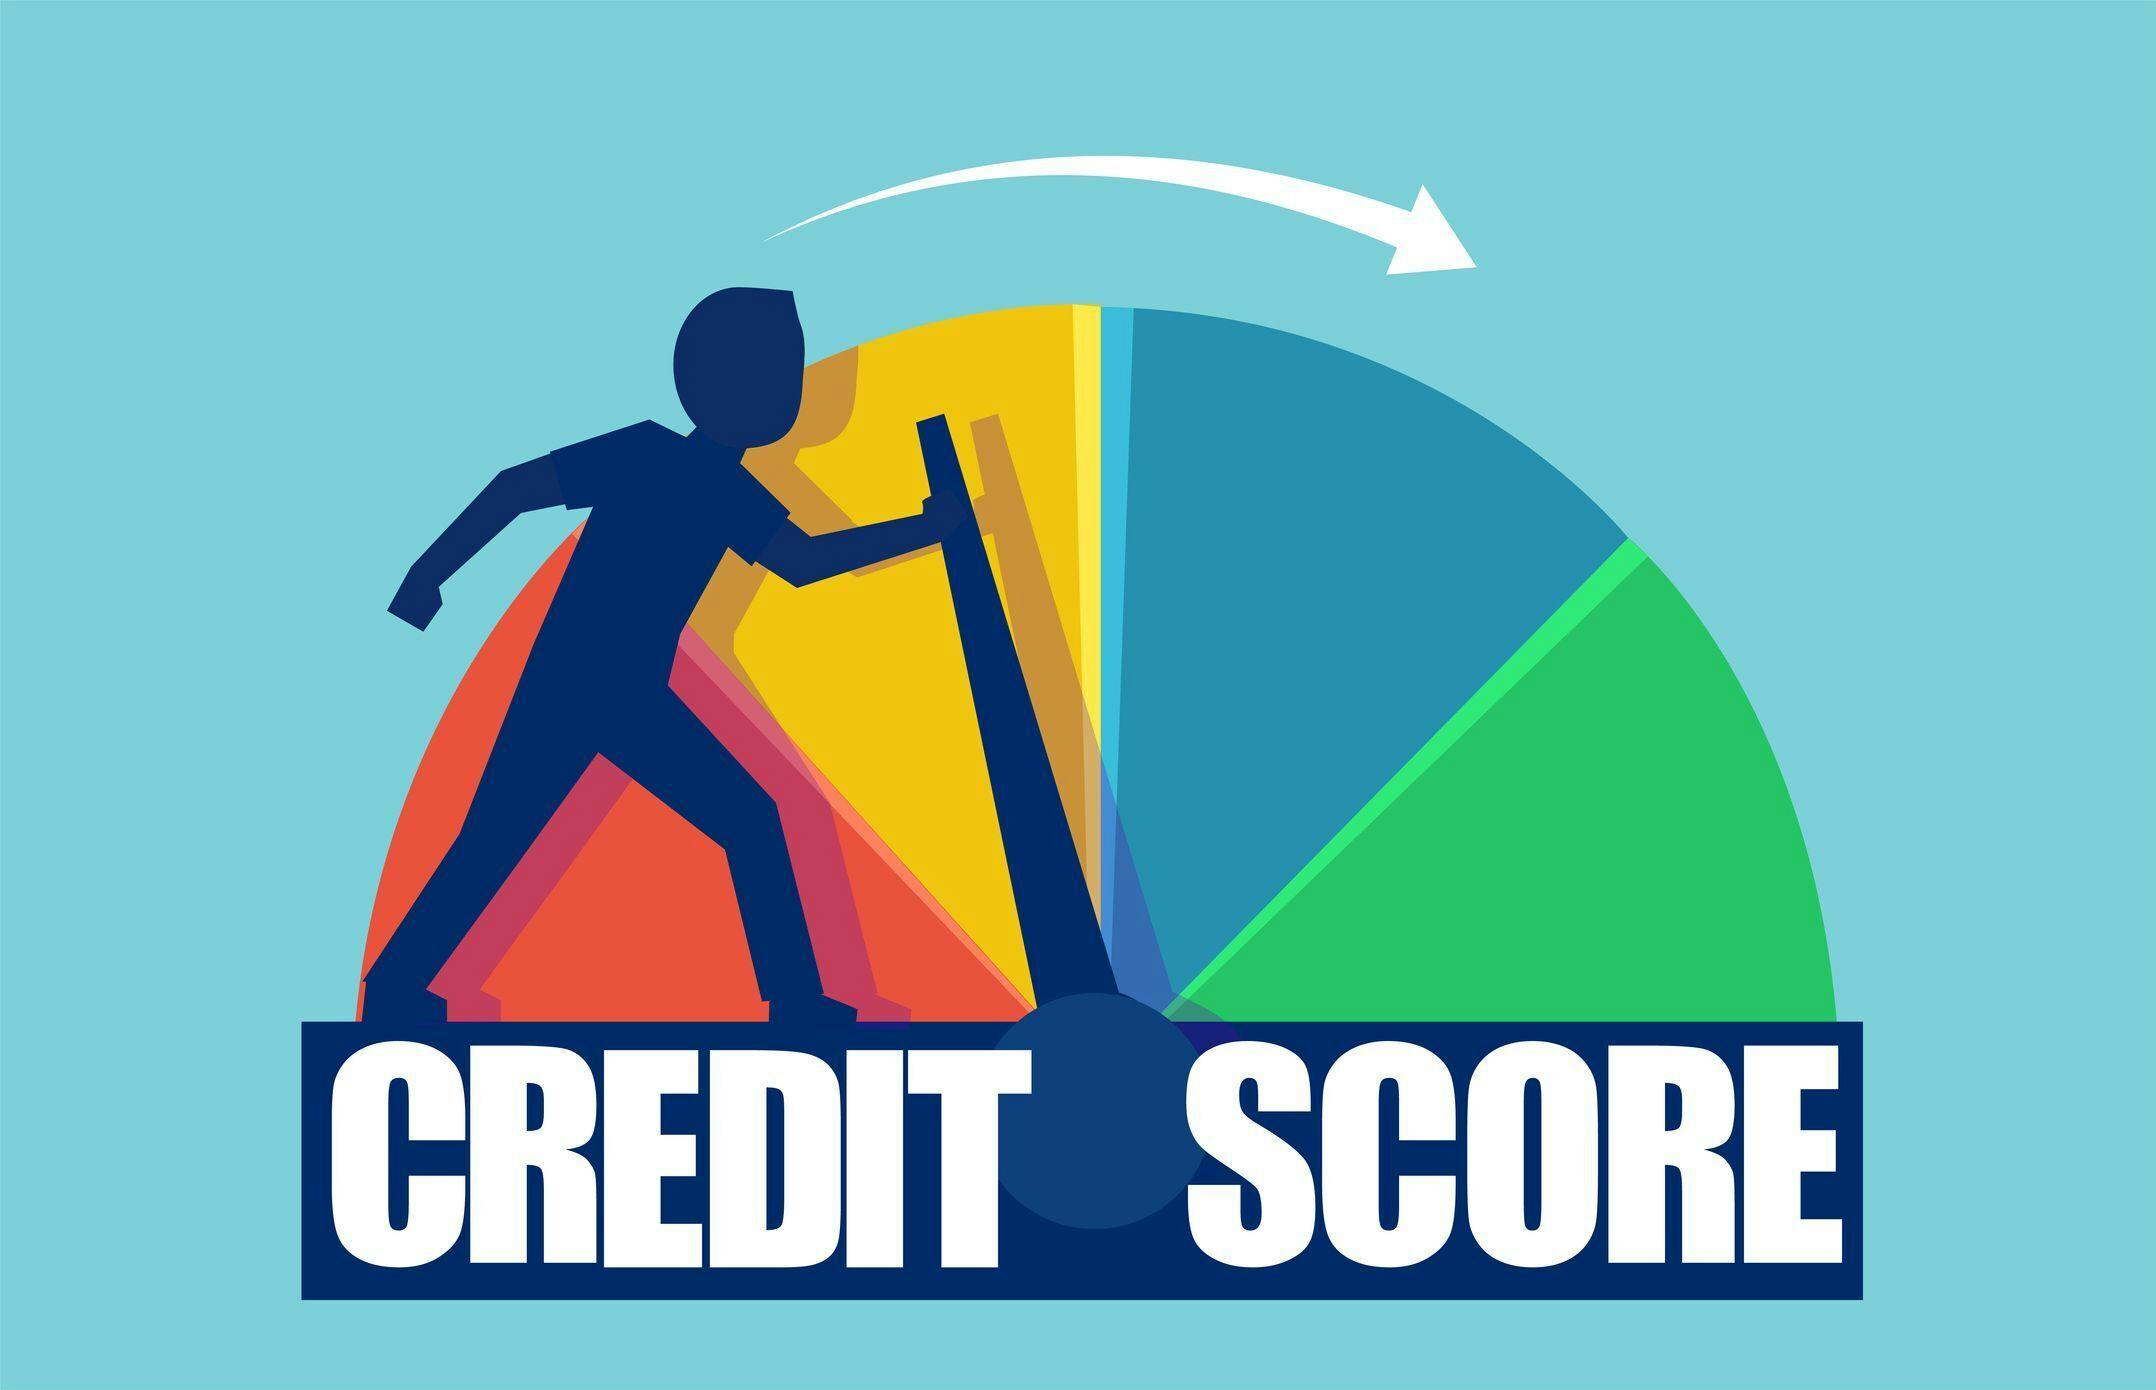 https://wsa-website-assets.s3.amazonaws.com/assets/images/How-To-Improve-Your-Credit-Score.jpg